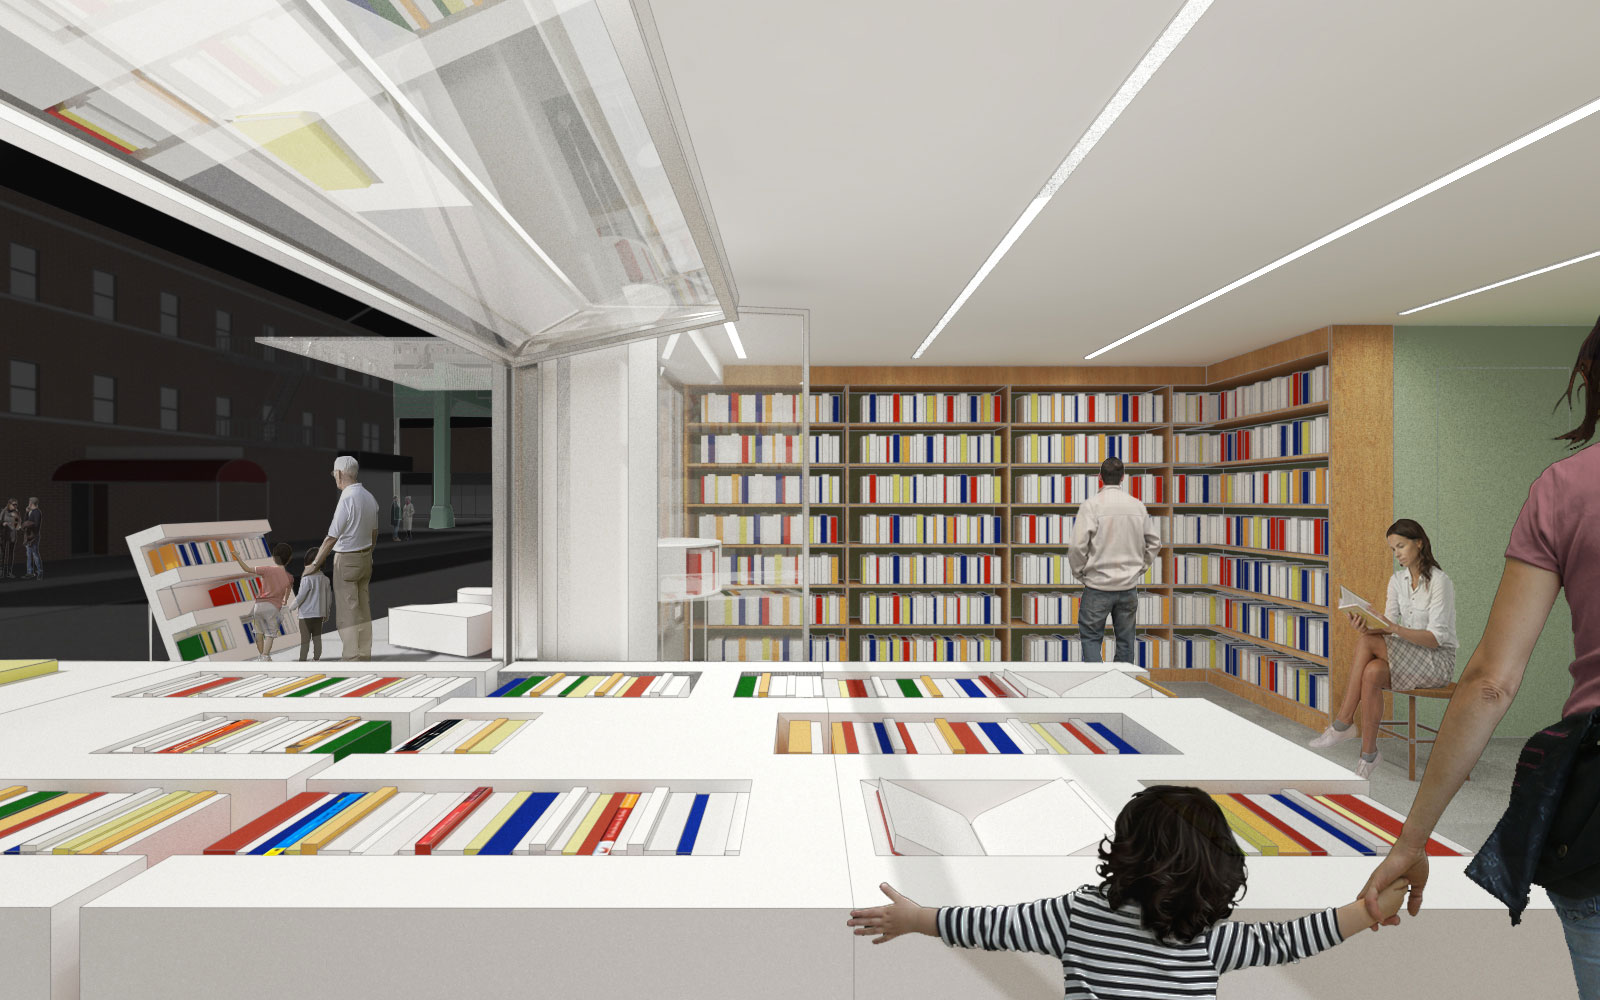 Rendering of a library interior